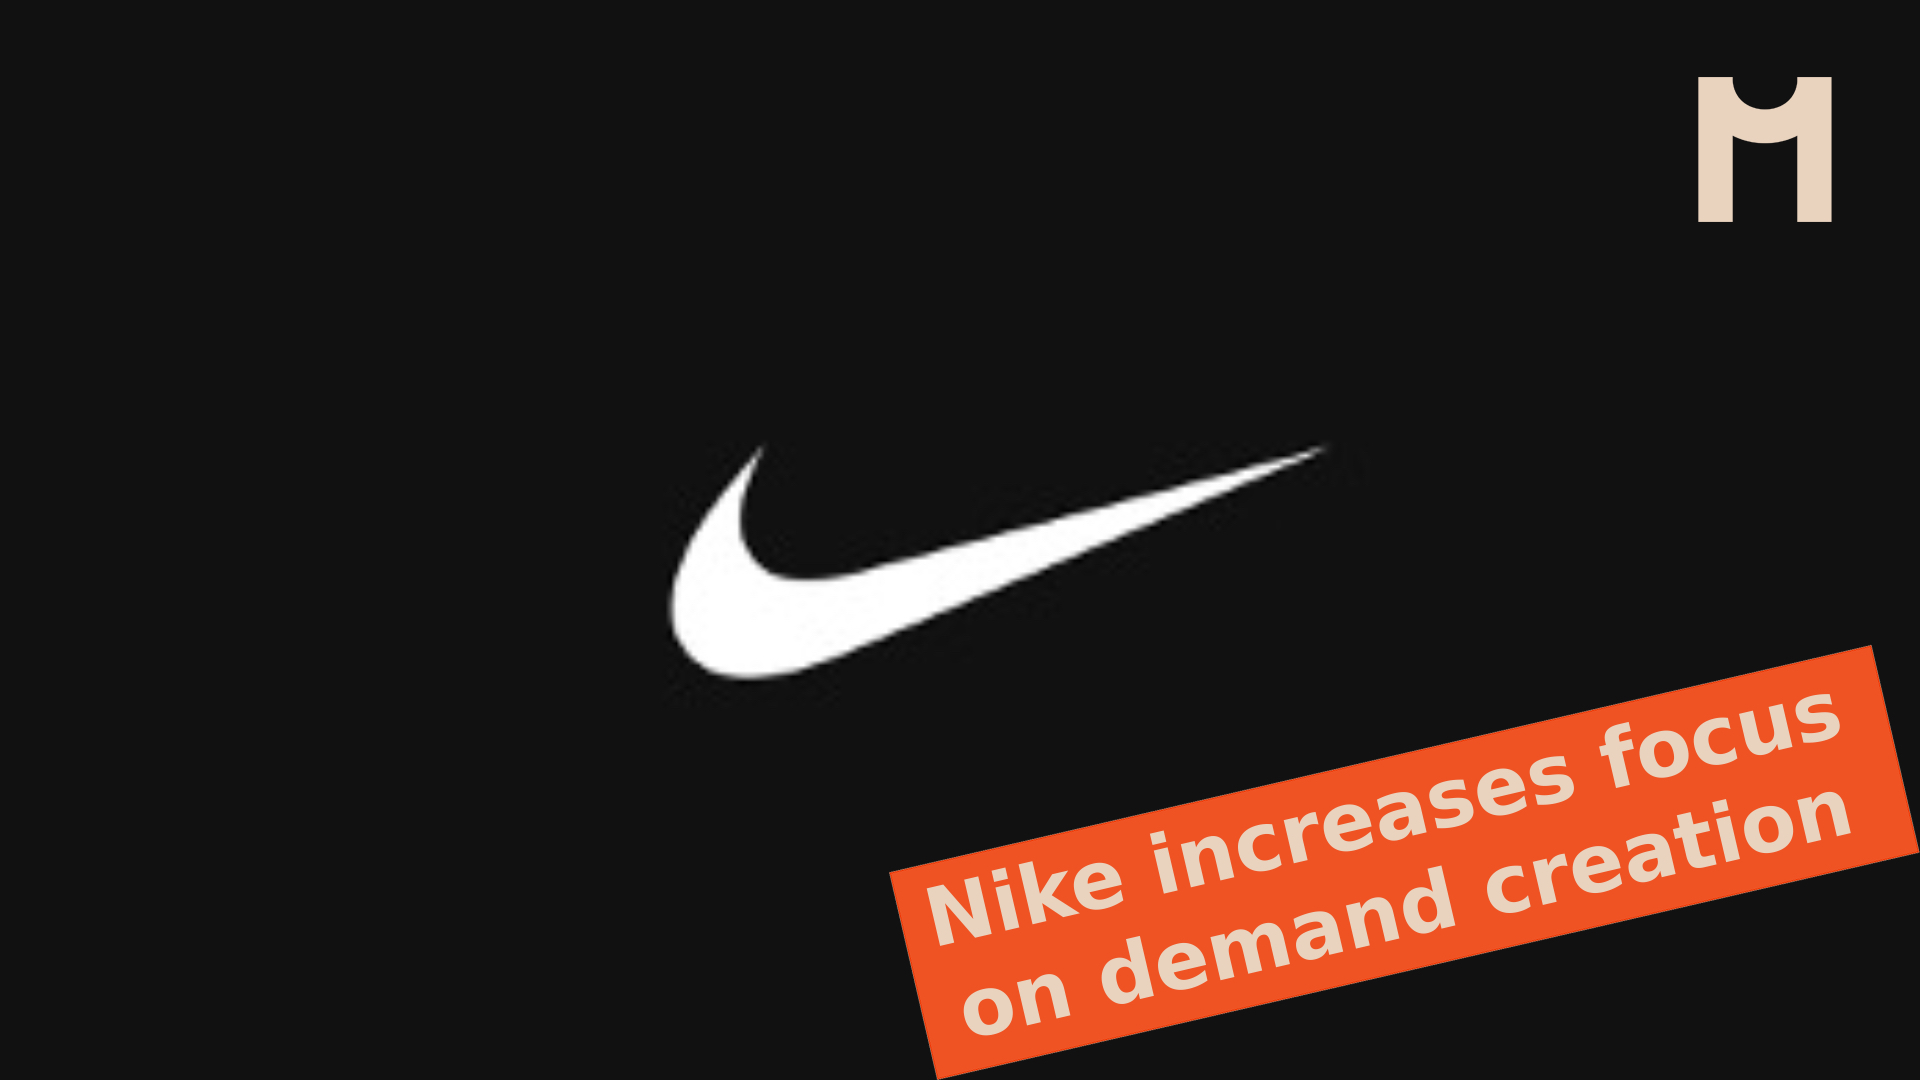 Nike pledges to ‘stay on the offensive’ as it increases focus on demand creation